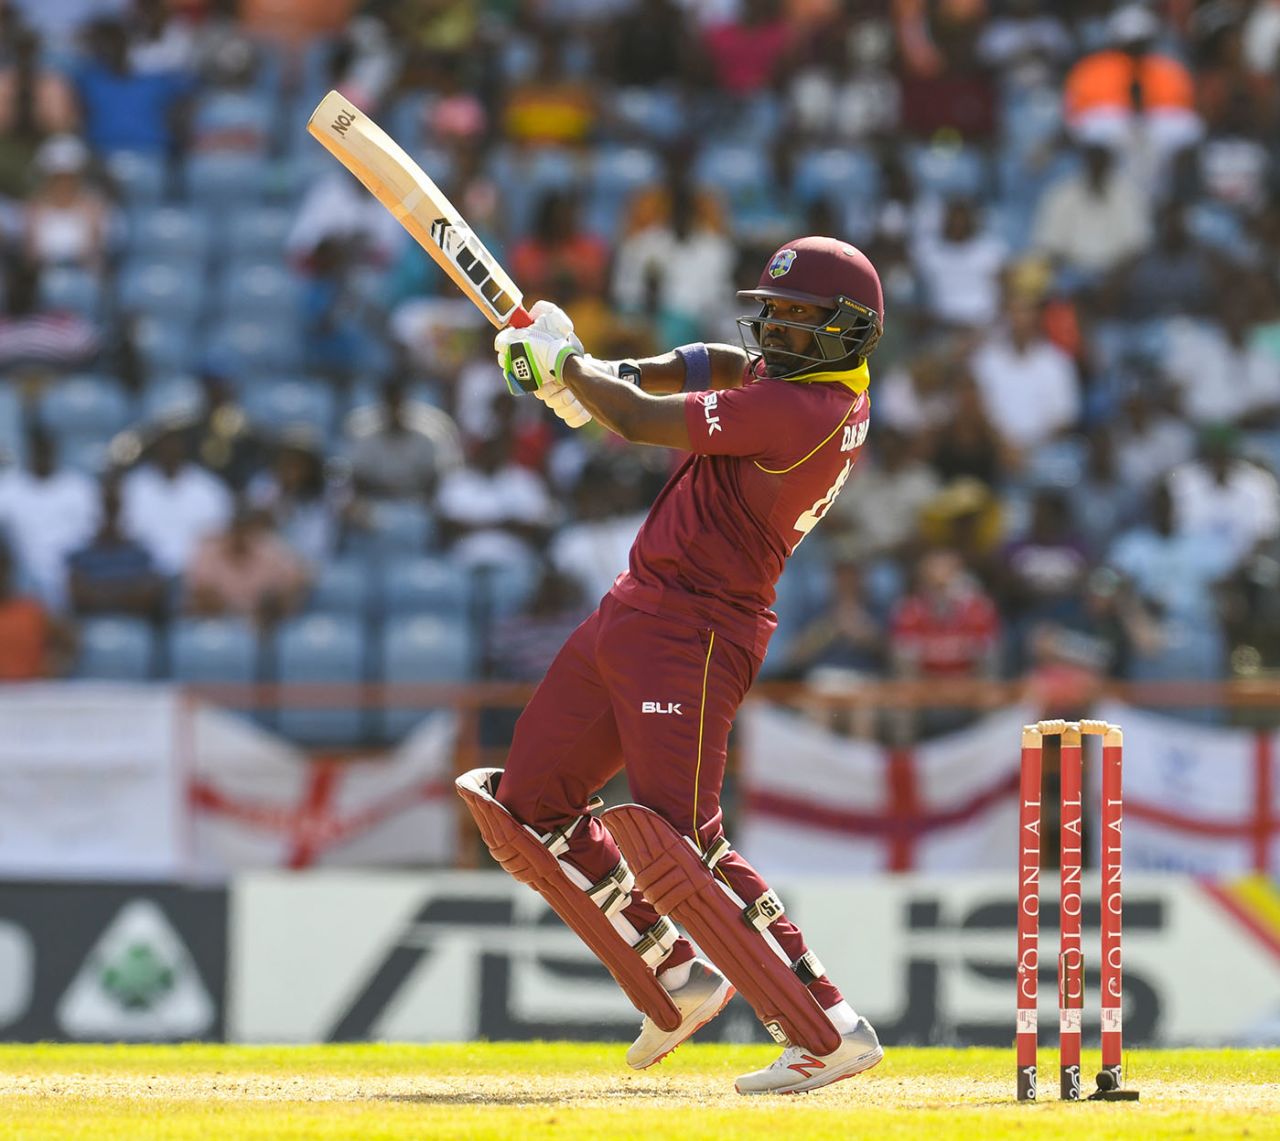 Darren Bravo cuts on his way to a fifty, West Indies v England, 4th ODI, Grenada, February 27, 2019